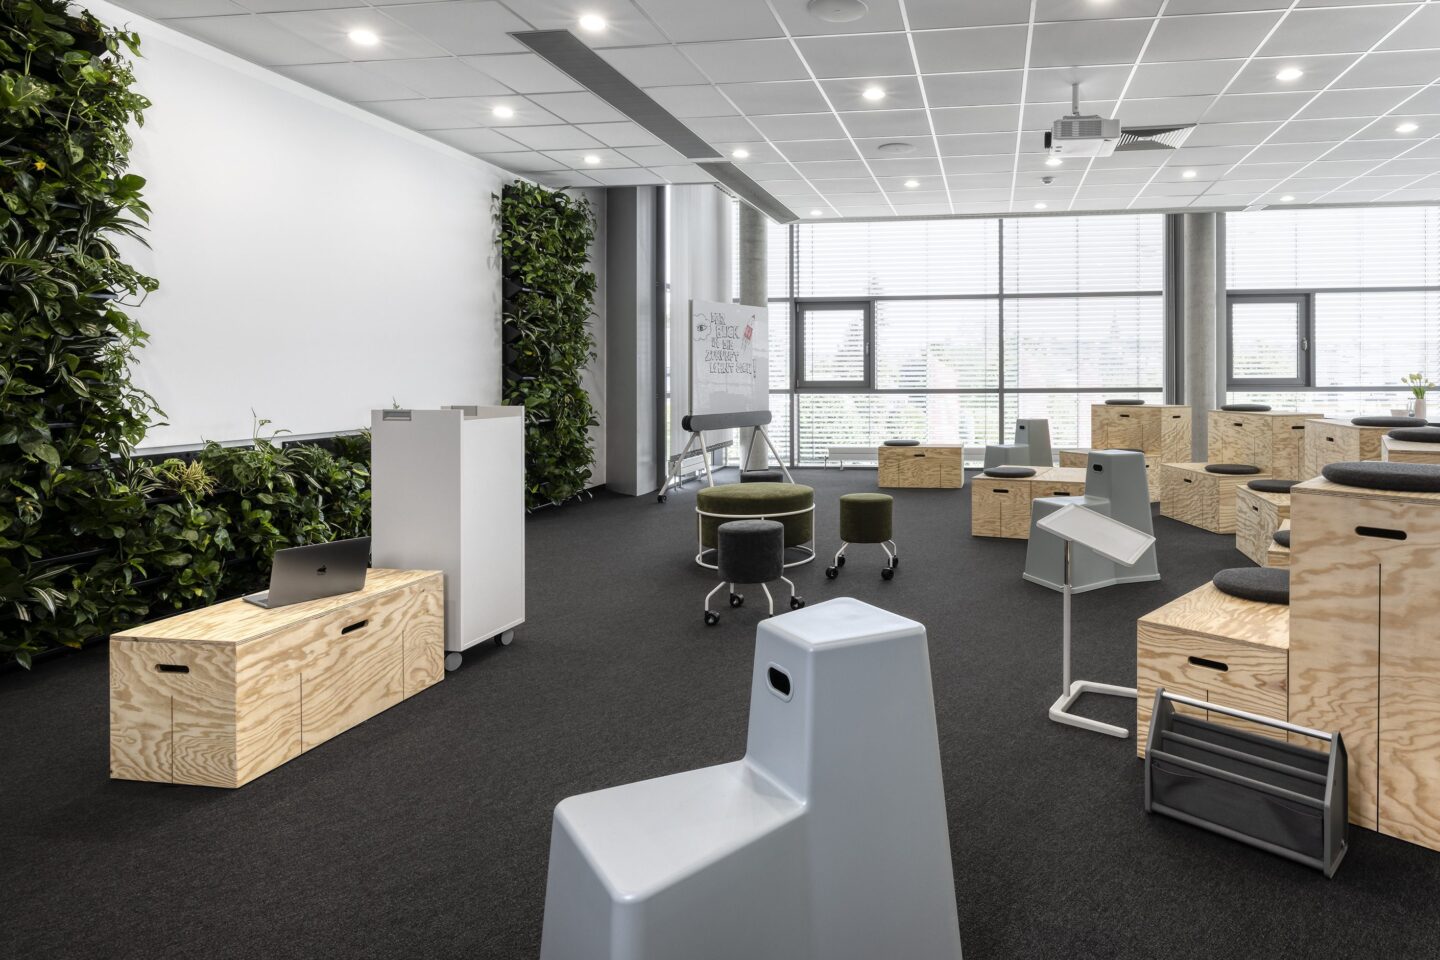 Seeburger AG, Bretten │ new working environment at the company headquarters │ new furniture creates